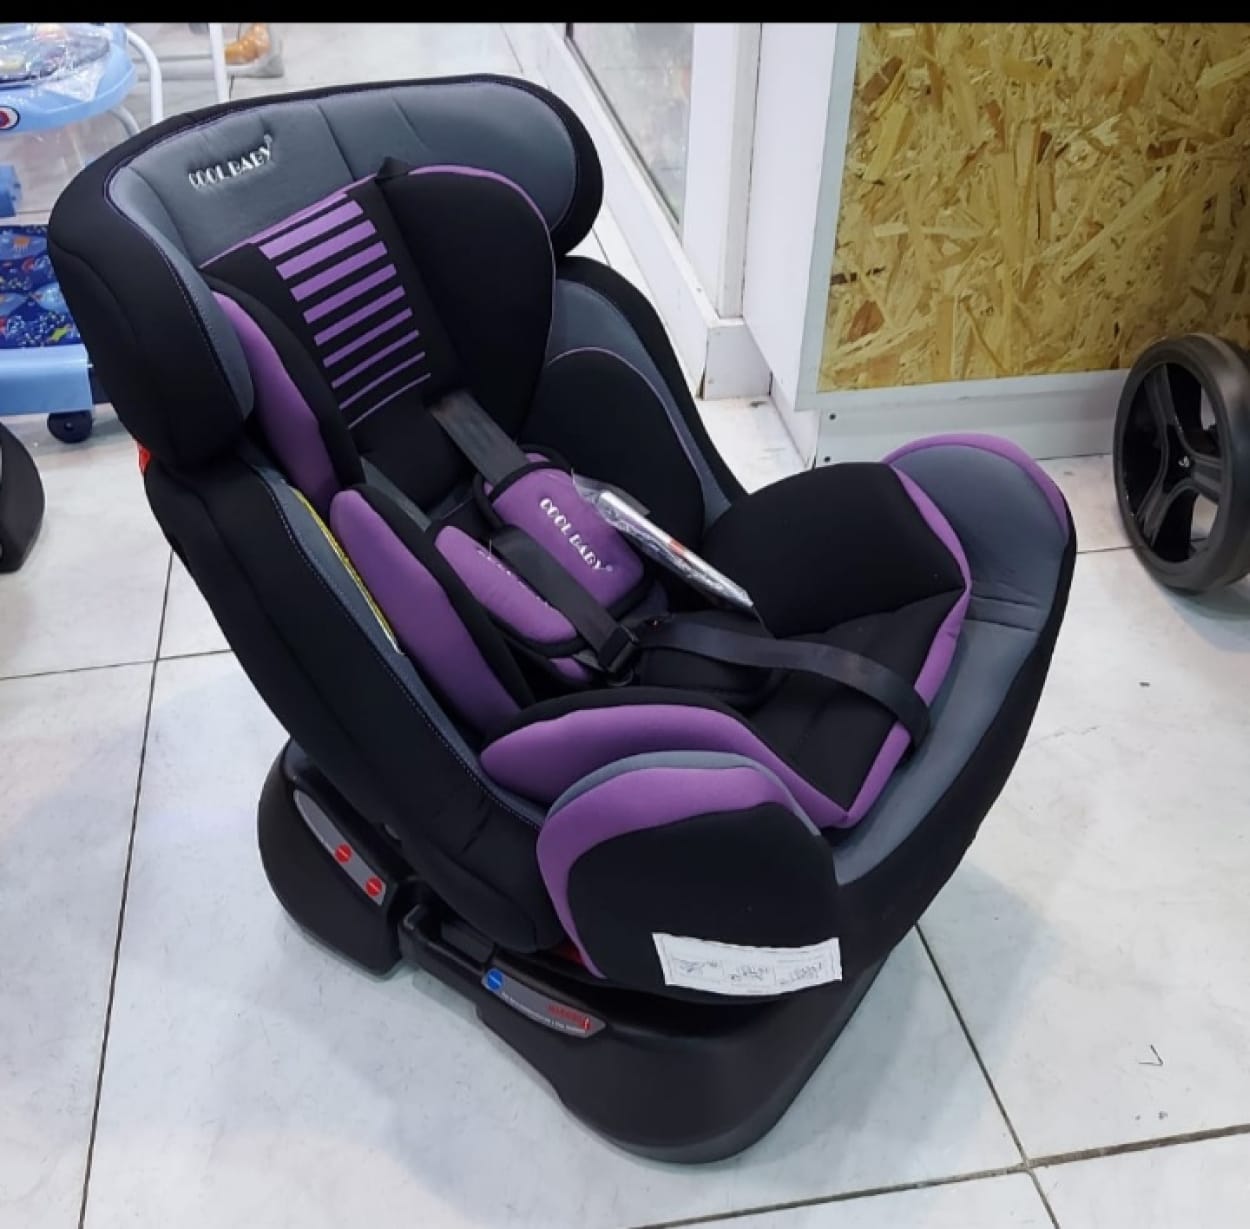 Up To 12 years Cool baby car Seat Best price ever, High Quality!